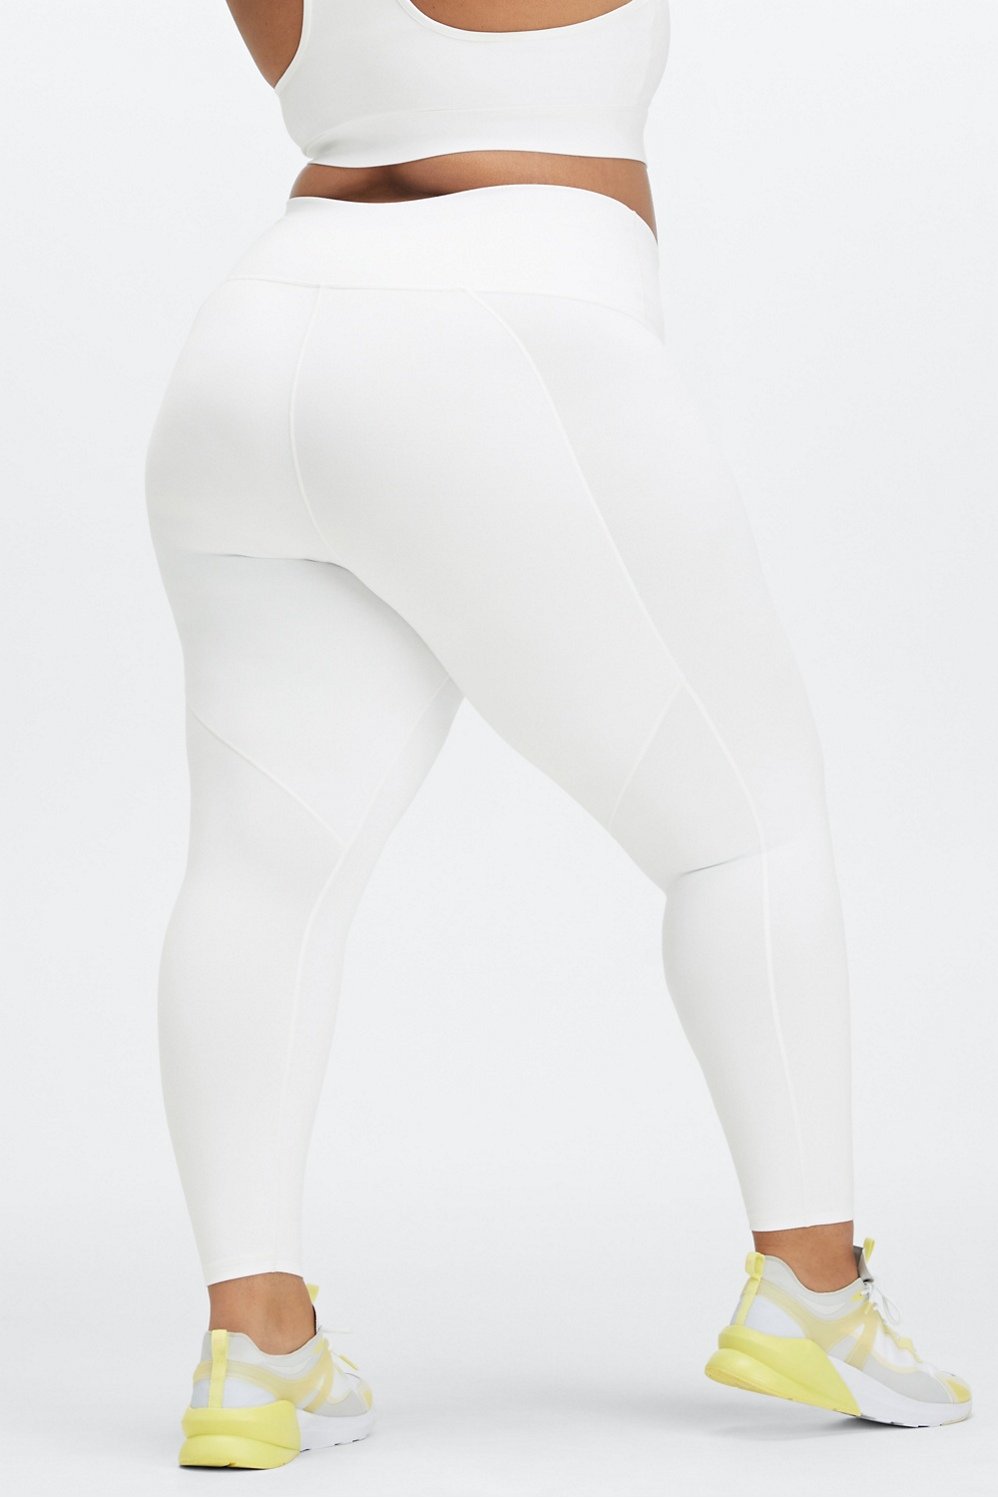 Fabletics 7/8 powerhold leggings with white and - Depop